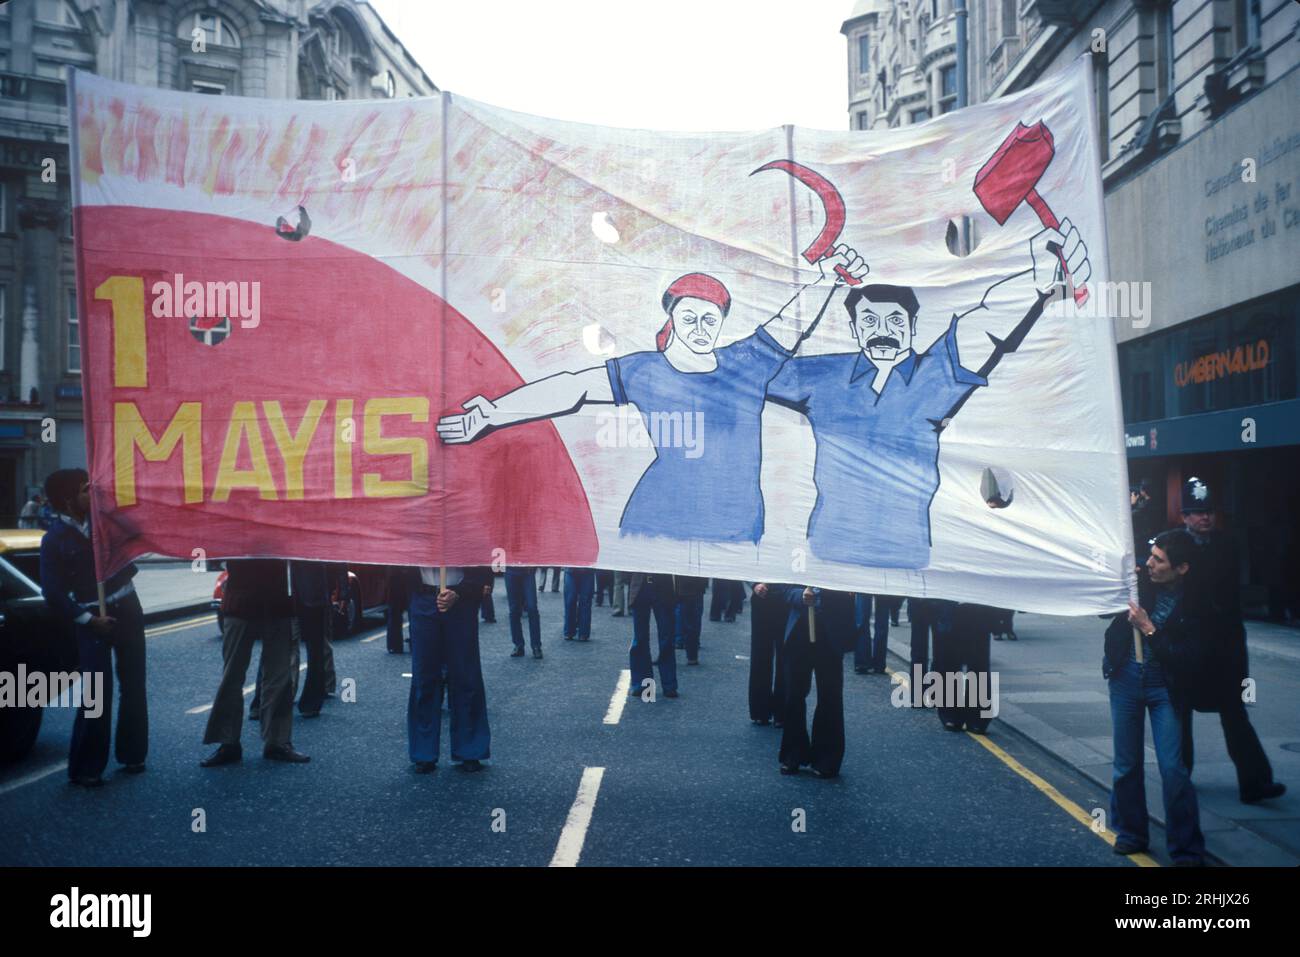 May Day March 1970s UK. International Workers' Day, also known as Labour Day  Hugh banner depicting a man and woman with a Hammer and Sickle, from the East End London to Hyde Park. London UK May 1977 HOMER SYKES. Stock Photo